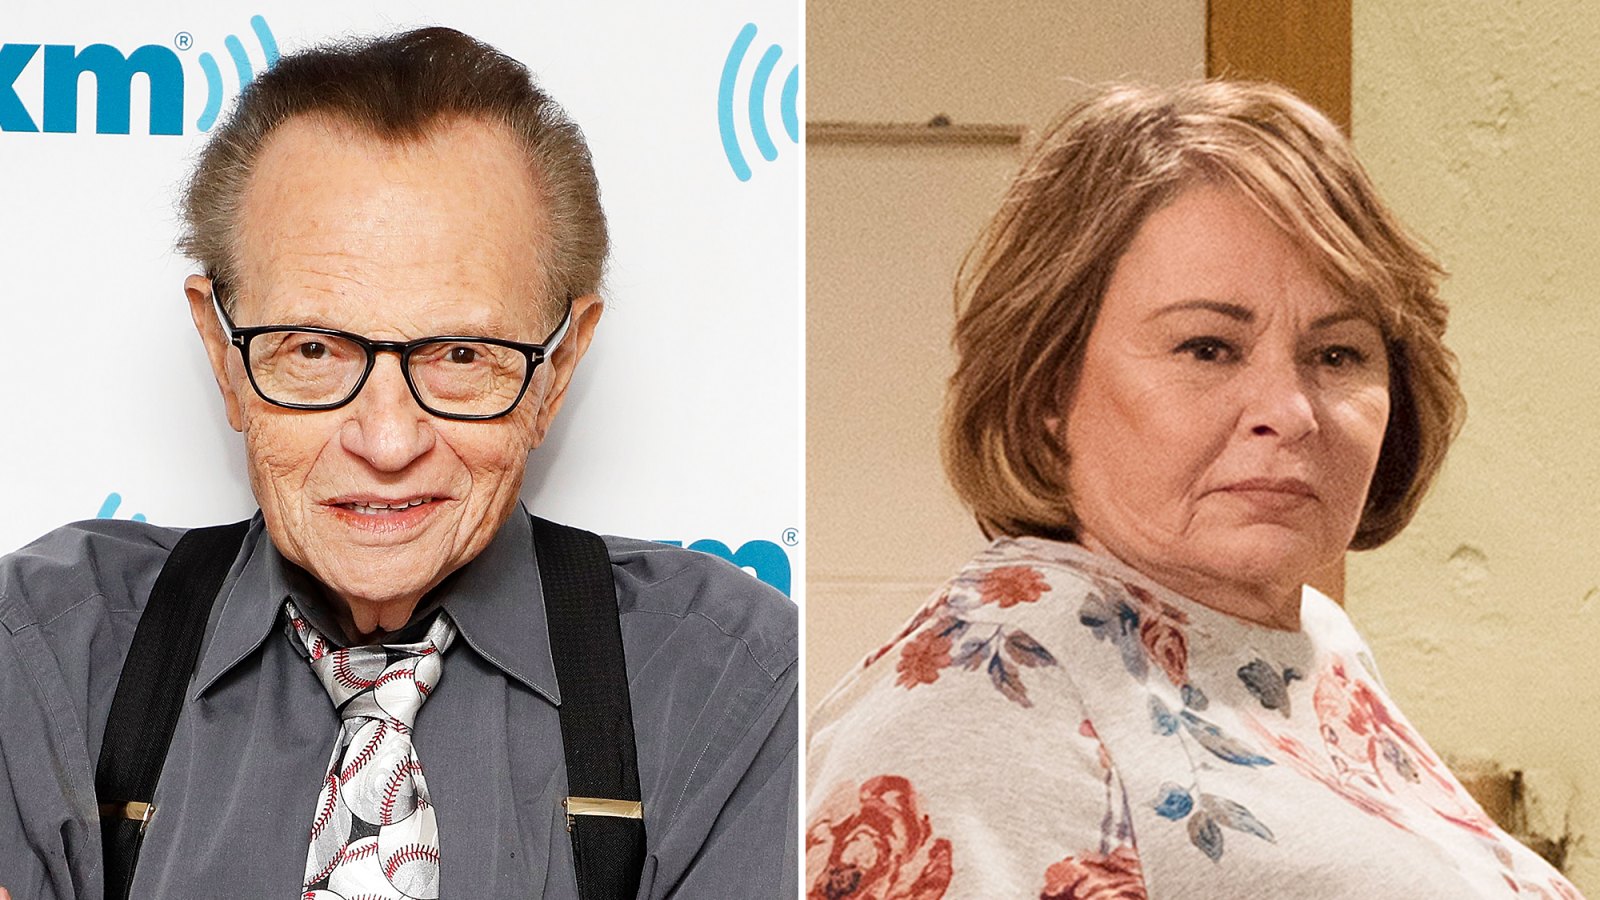 Larry King Thinks Roseanne Has Great Political Balance